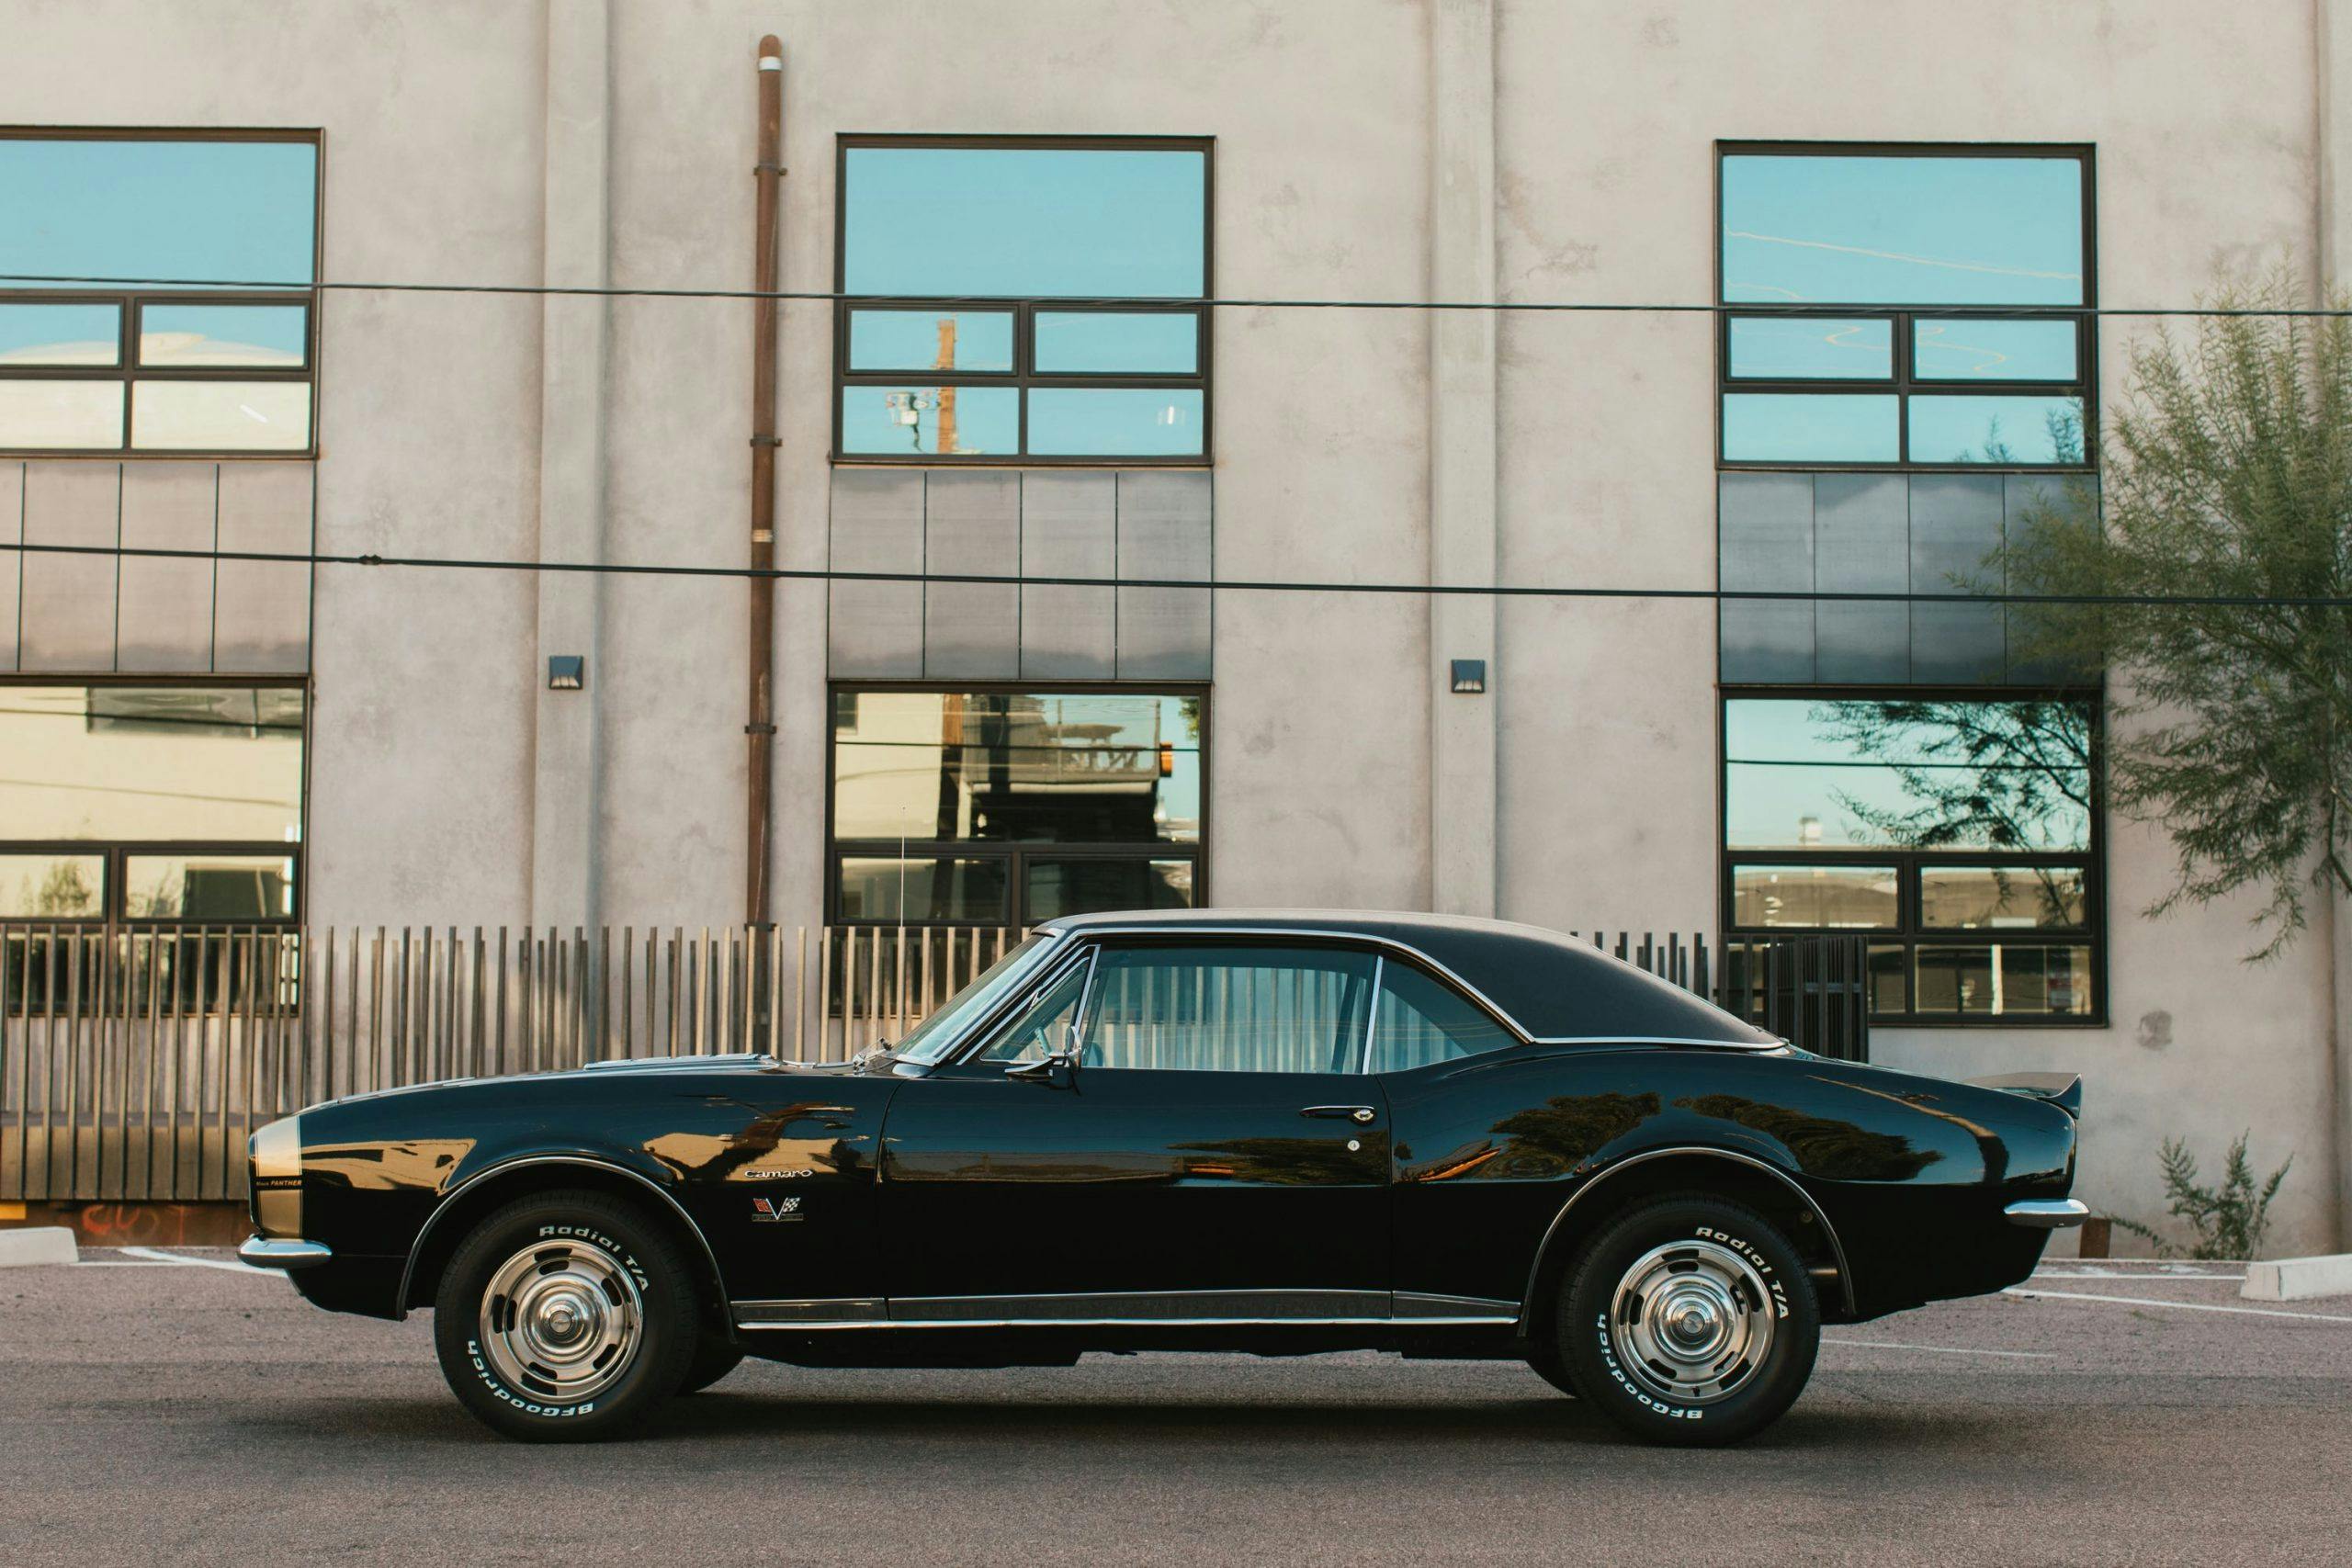 Meet the Black Panther, Ontario's own dealer-special Camaro - Hagerty Media